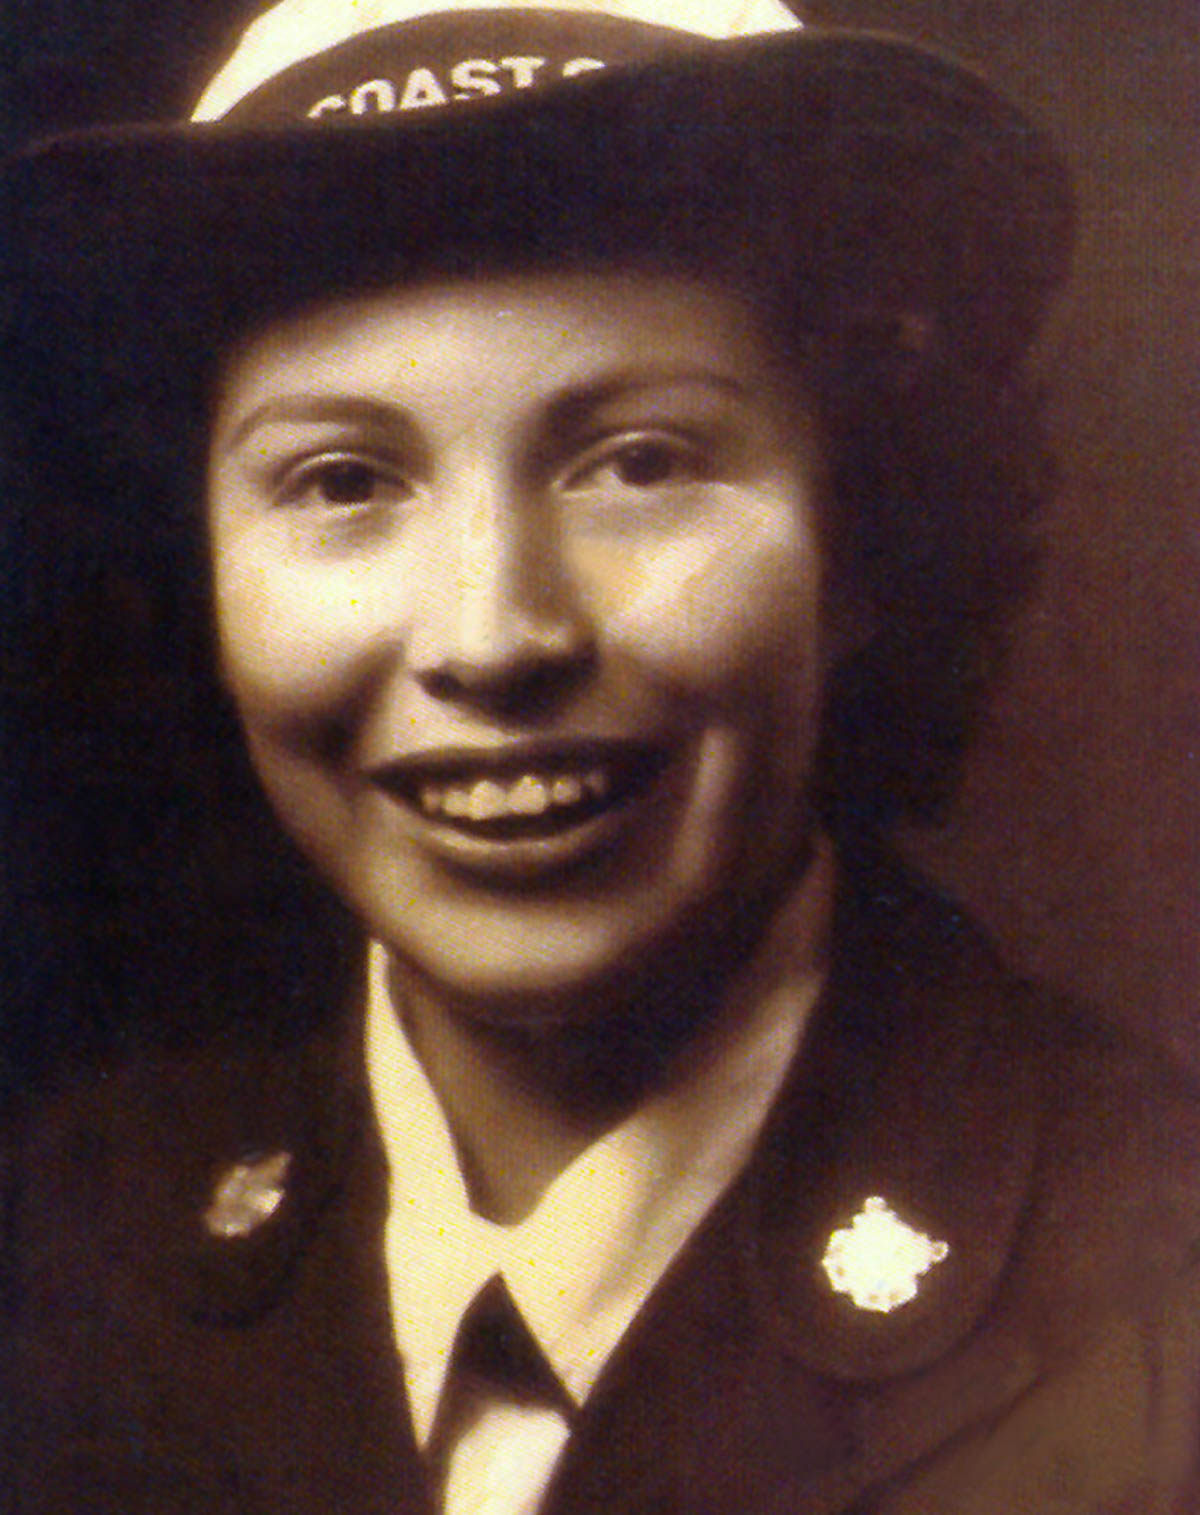 2.	Official photograph of Seaman Mildred Cleghorn Womack in uniform. (Photo from Military Women’s Memorial)